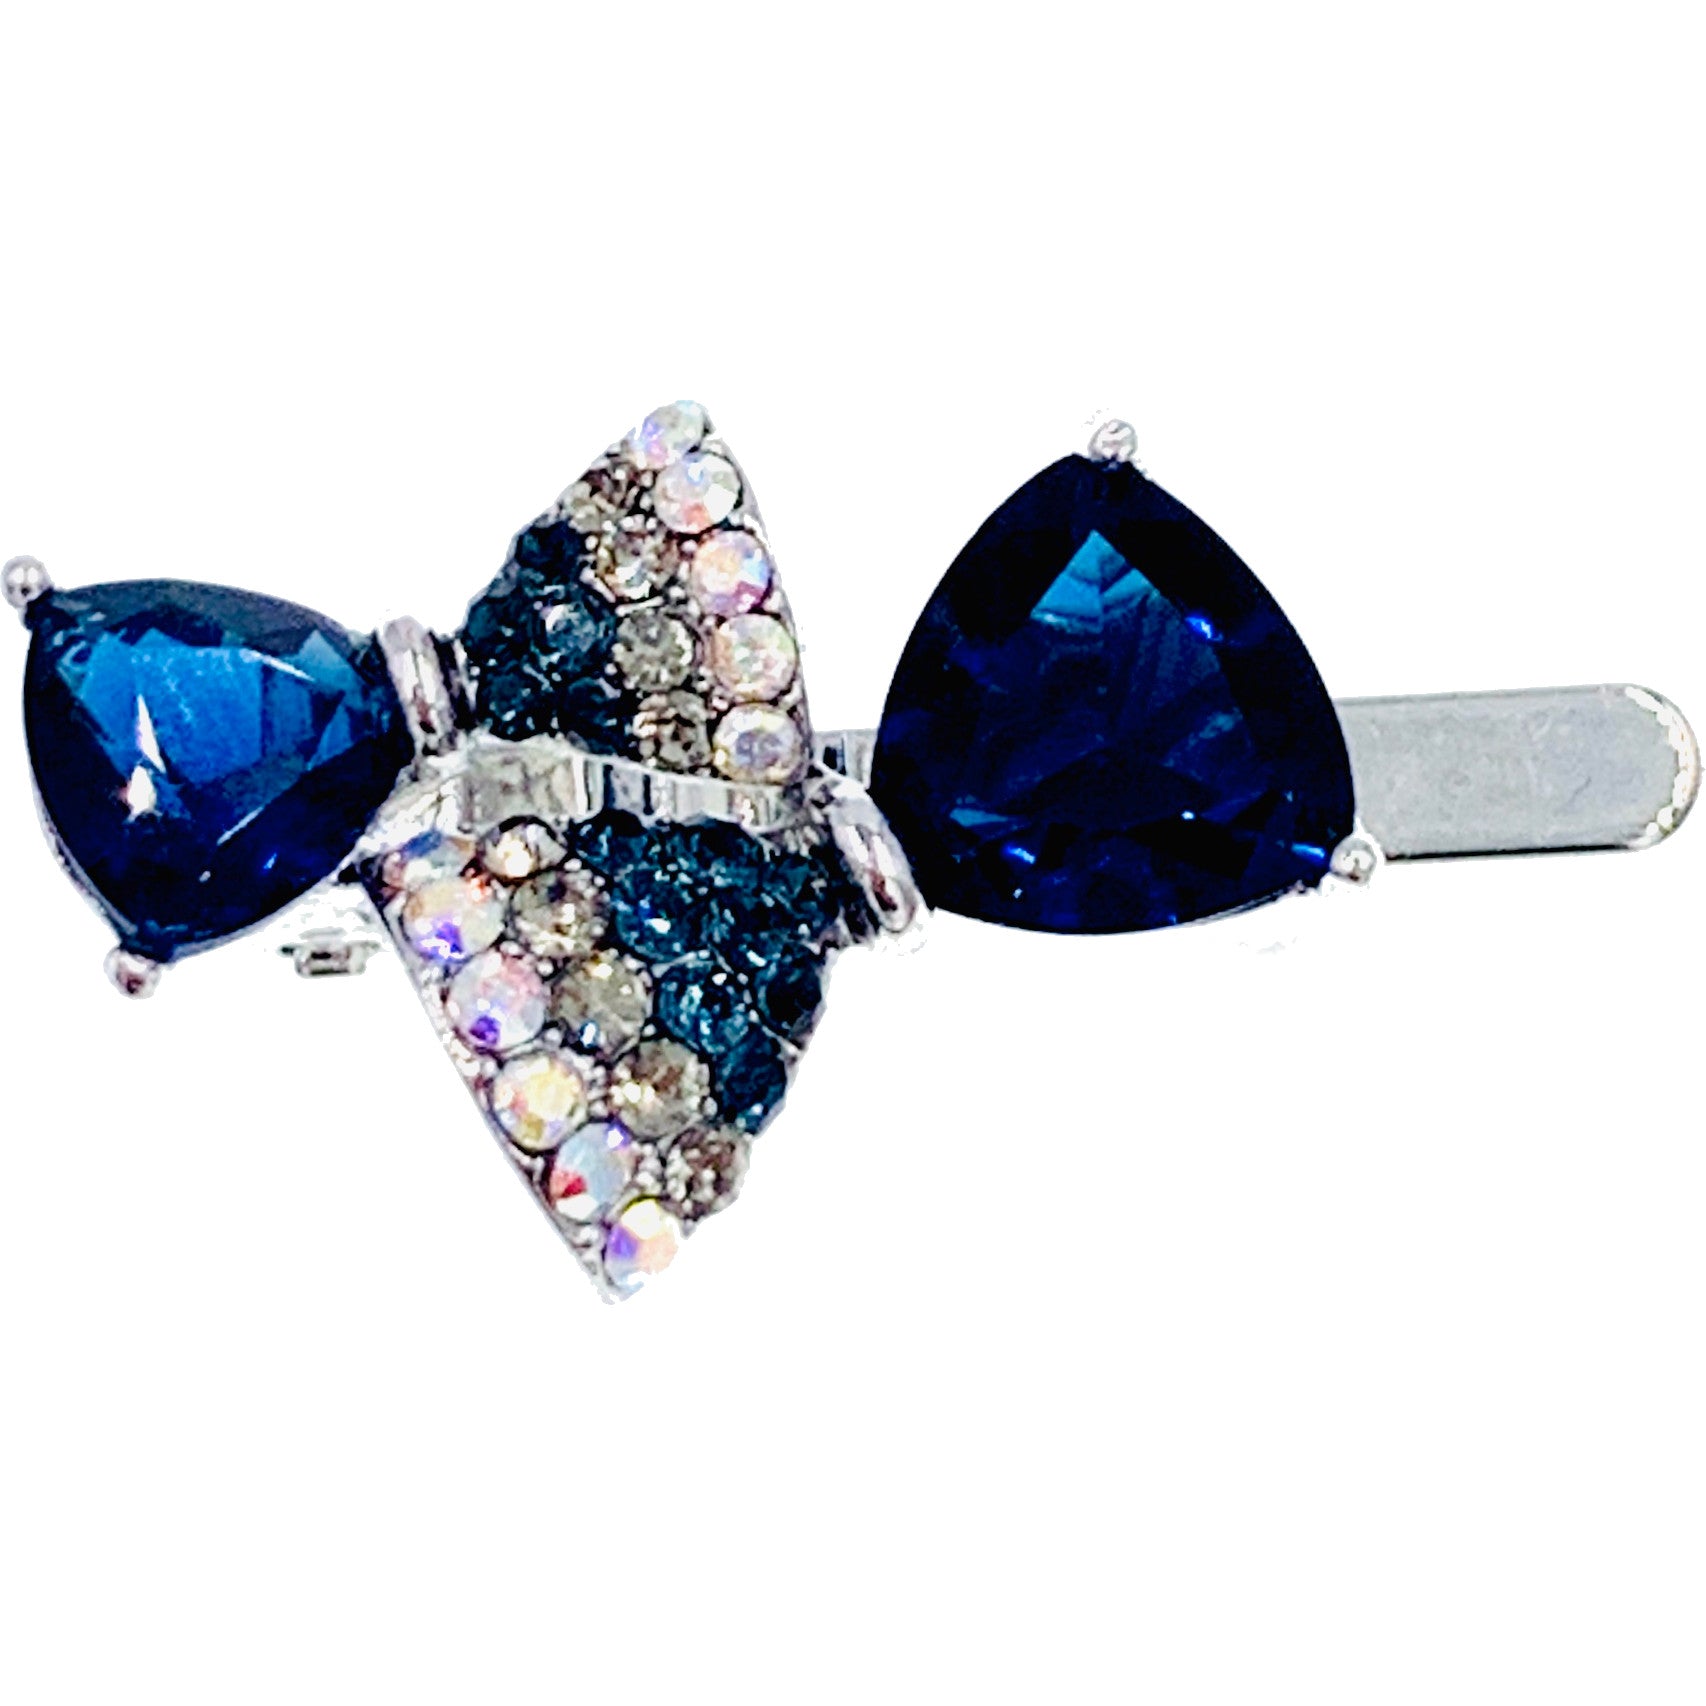 Dale BOW Magnetic Hair Clip Cubic Zirconia Crystals Hairpin Barrette, Magnetic Clip - MOGHANT